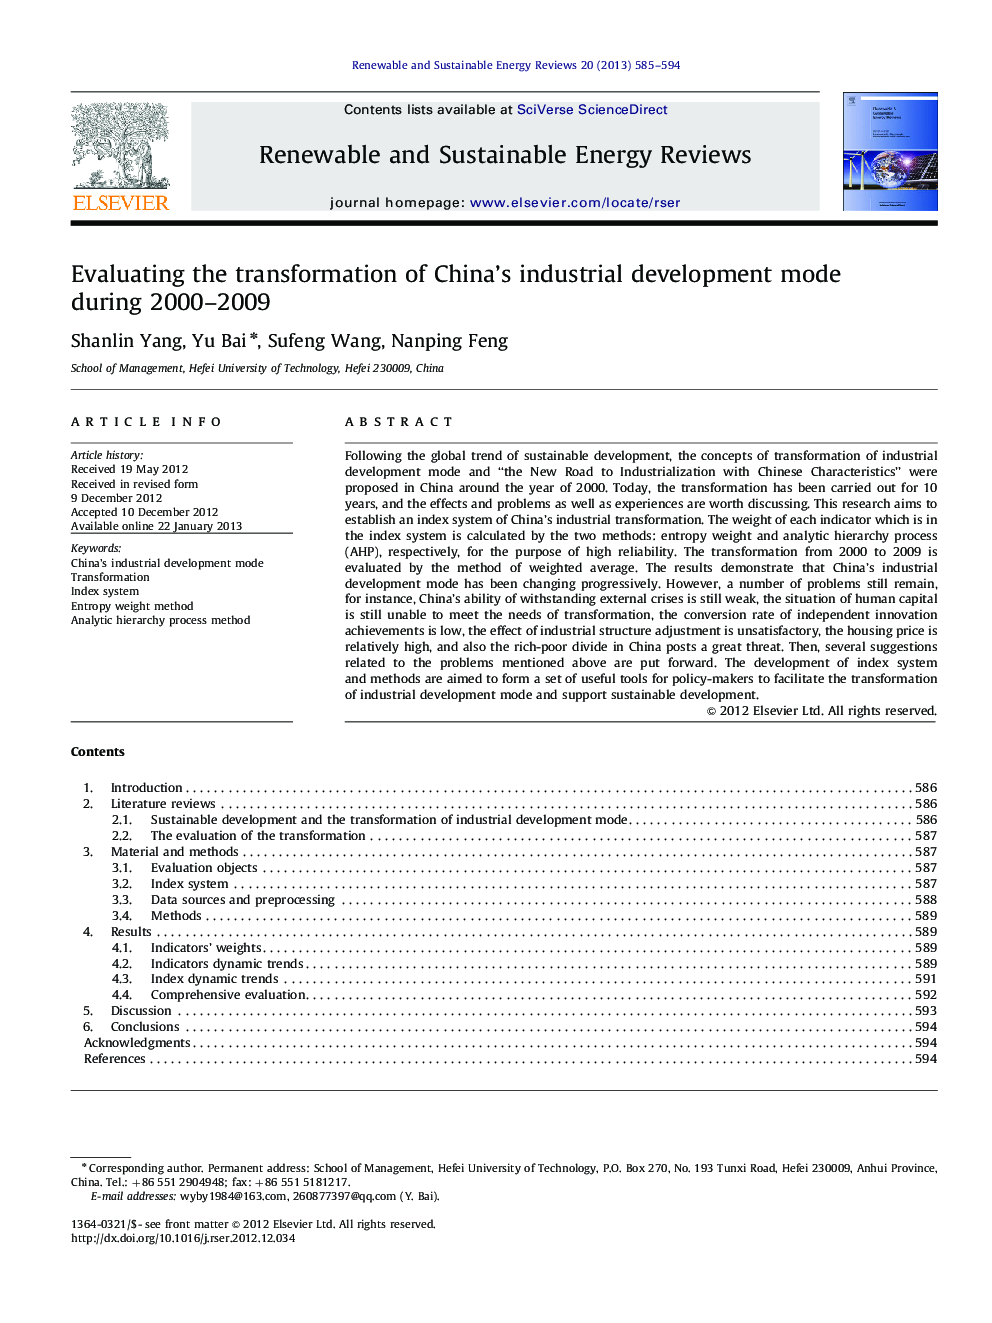 Evaluating the transformation of China's industrial development mode during 2000-2009